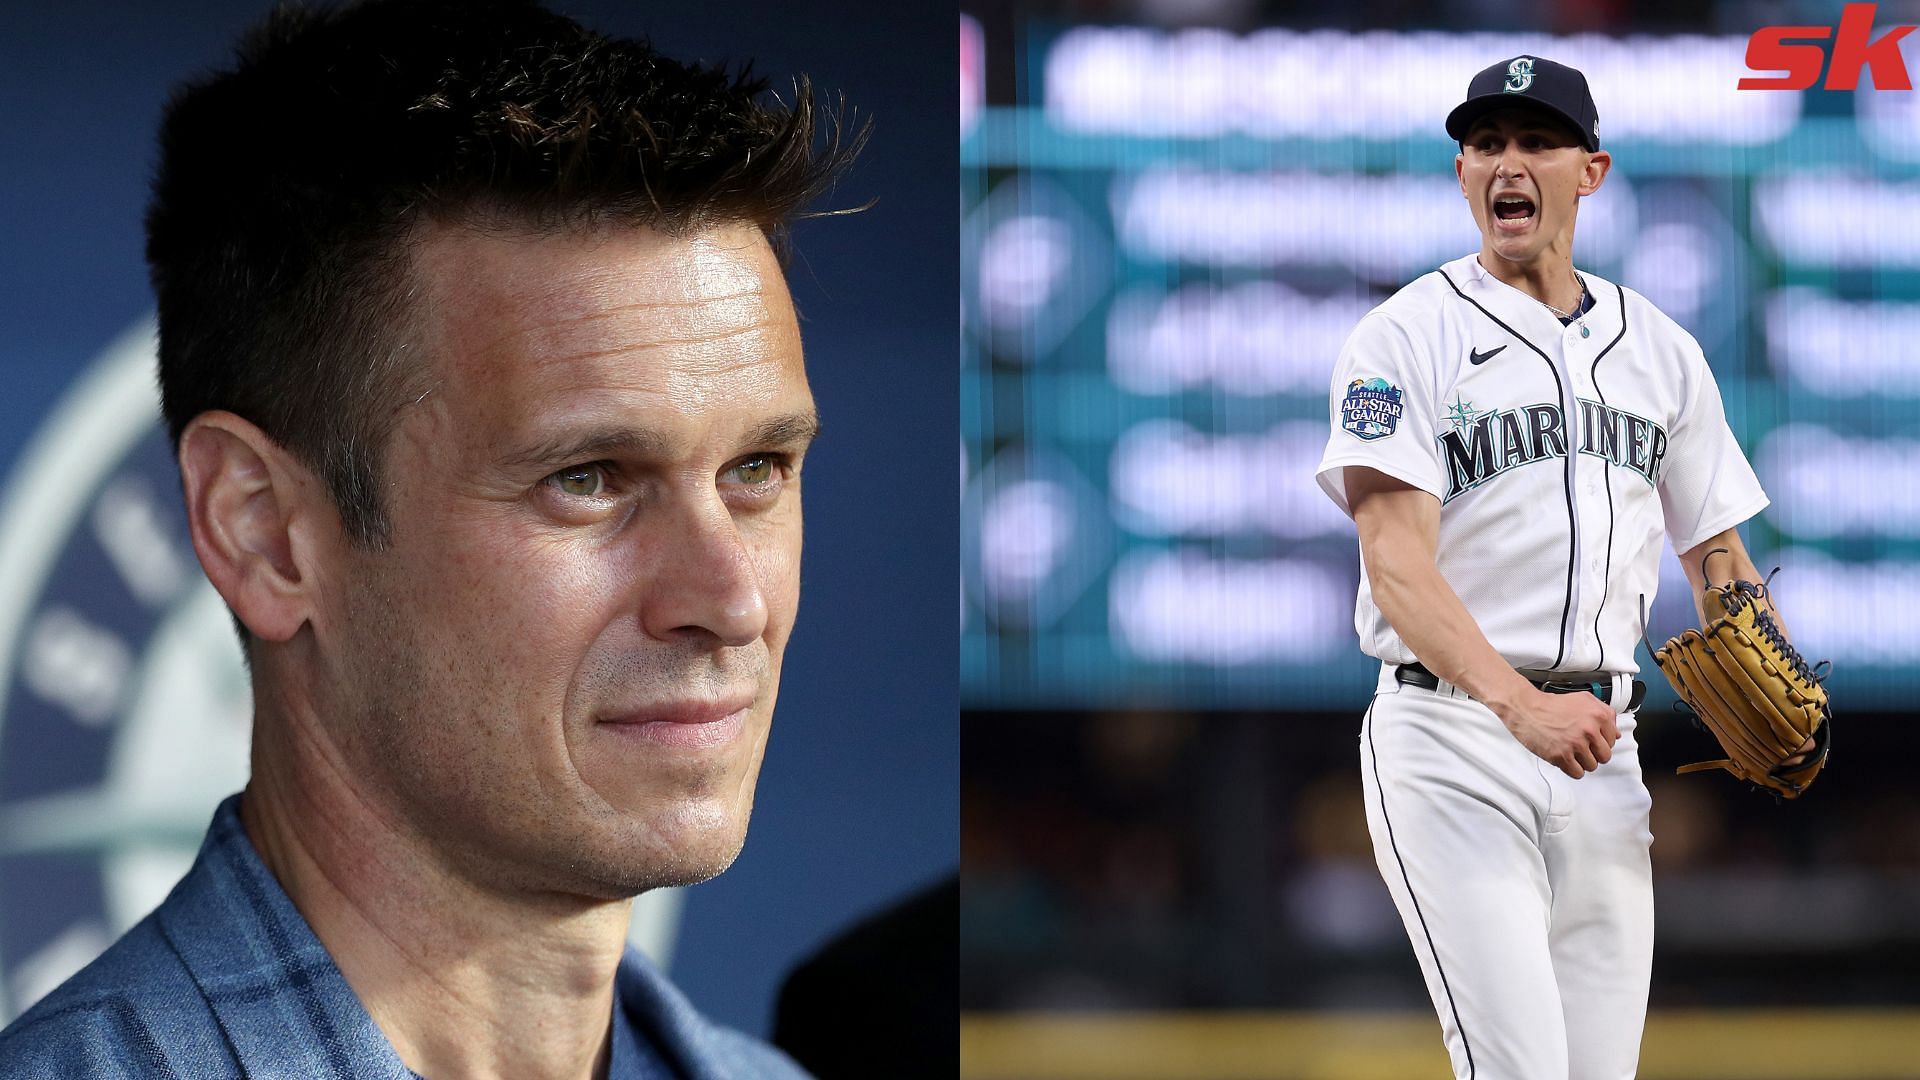 Mariners president Jerry Dipoto stands by George Kirby after controversial  rant - George is the guy who wants the ball and wants to go compete